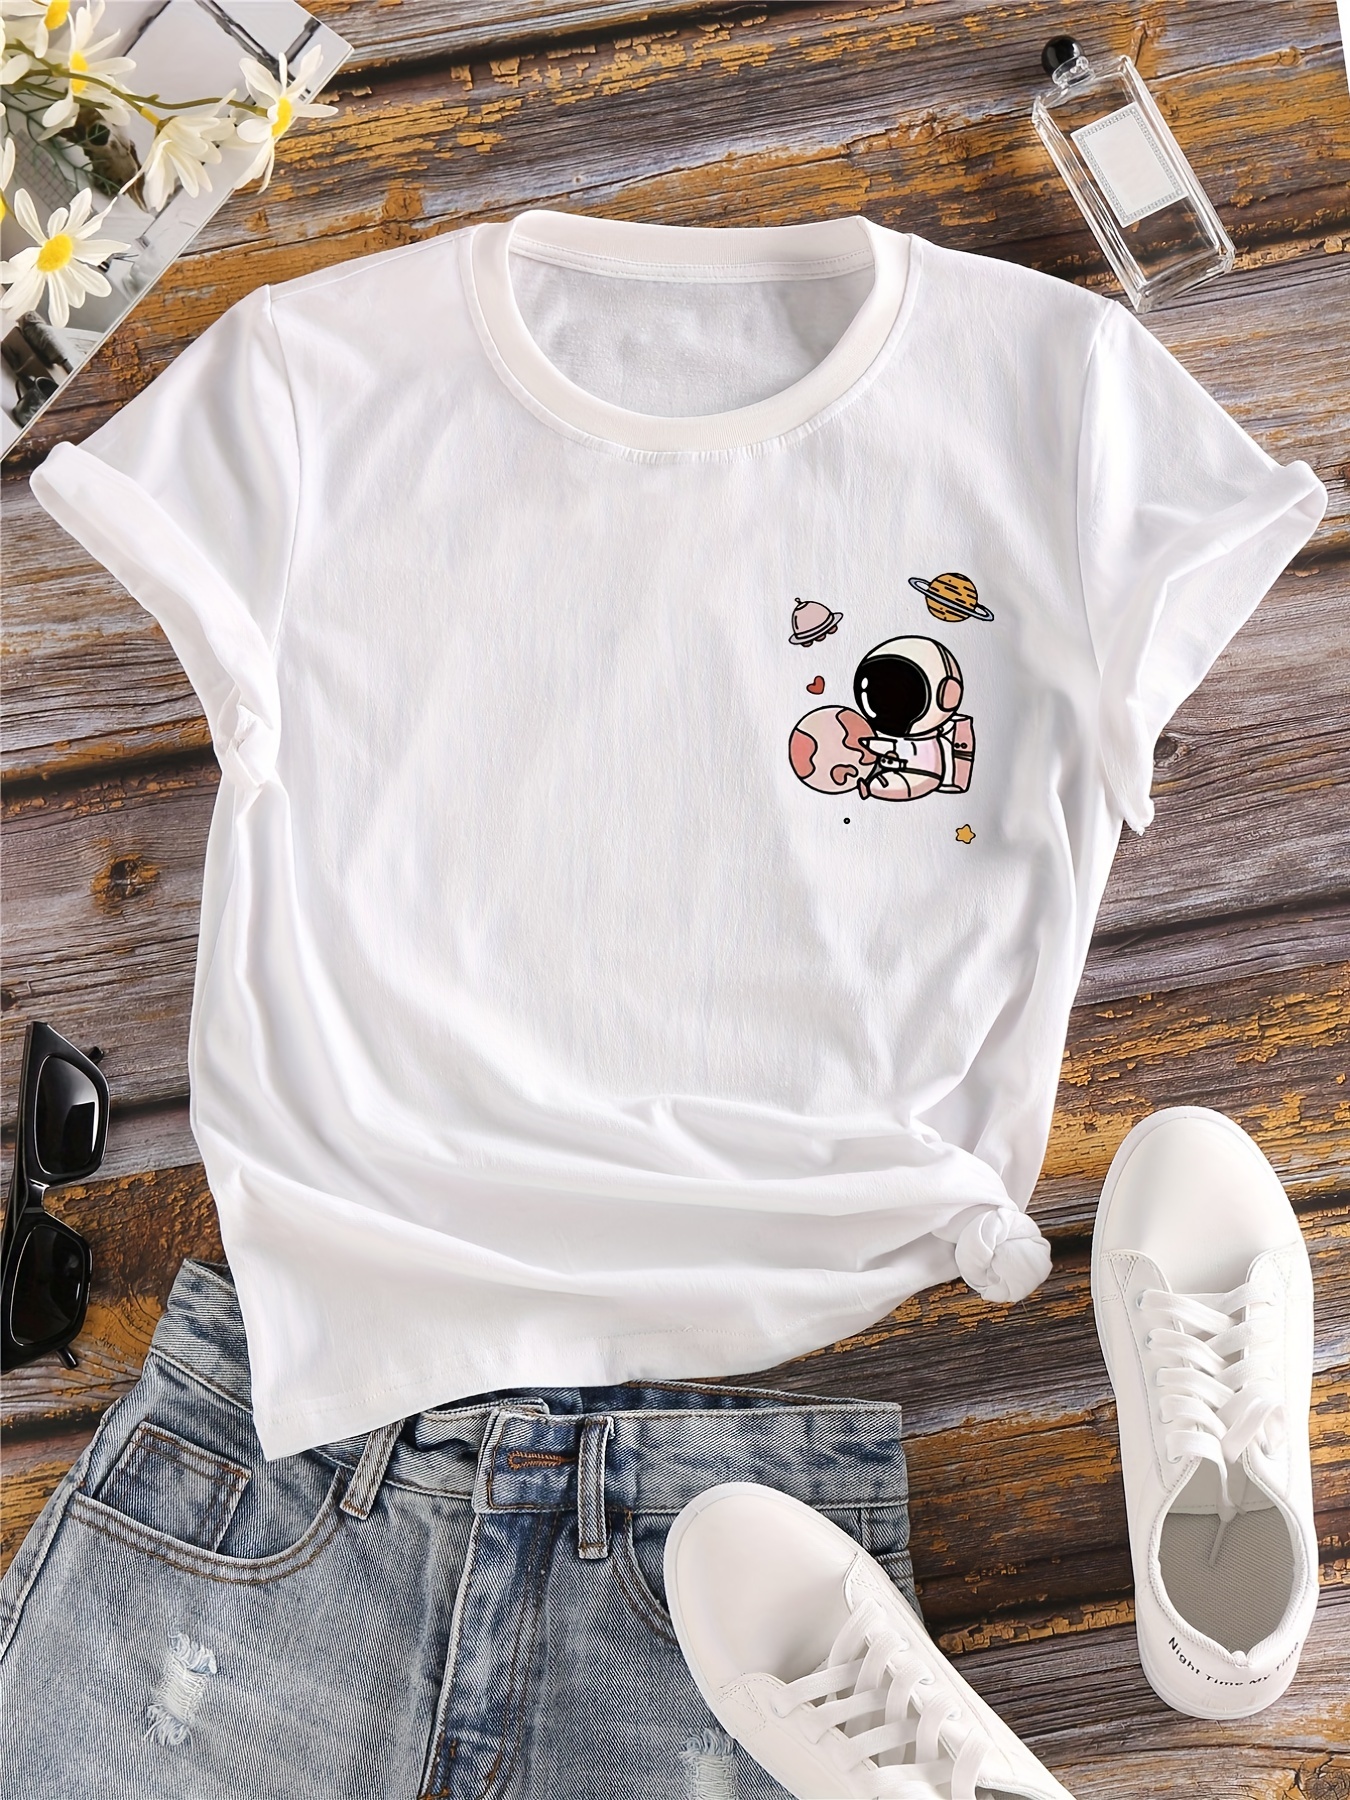 Sexy Woman Clothes Minnie Mouse Women's T-shirt Sleeveless Tank